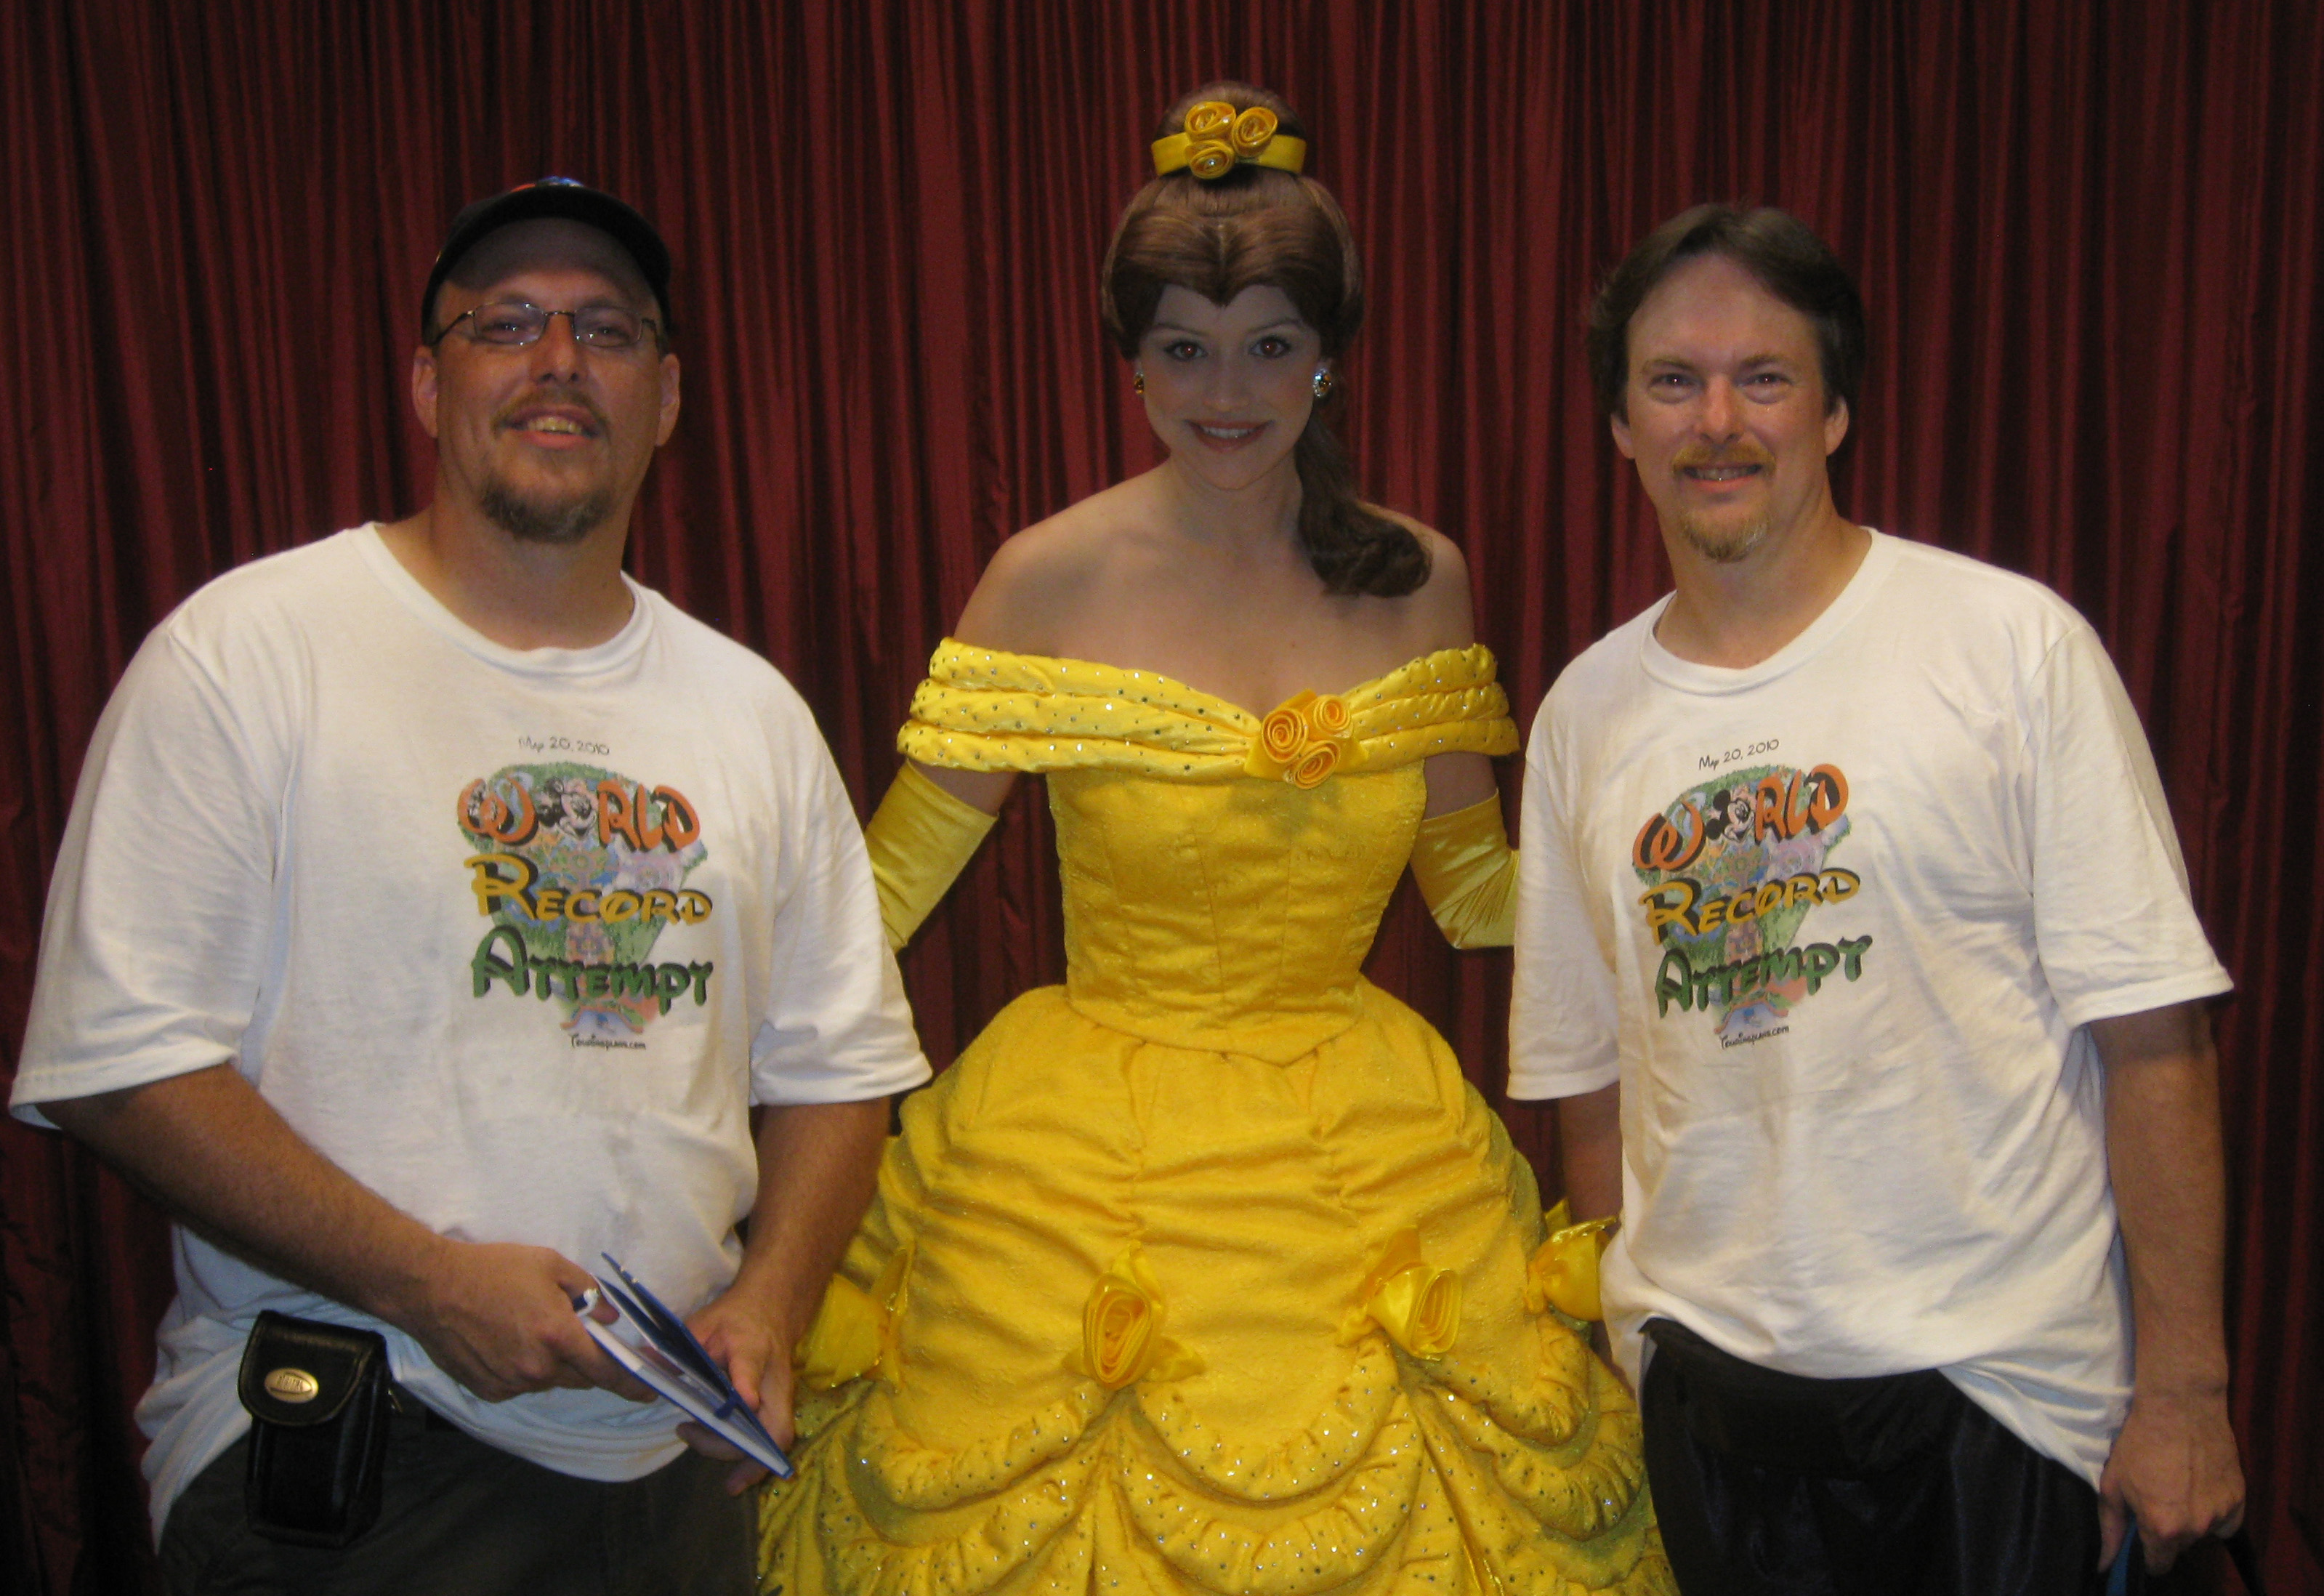 Belle at Toontown in Magic Kingdom 2010